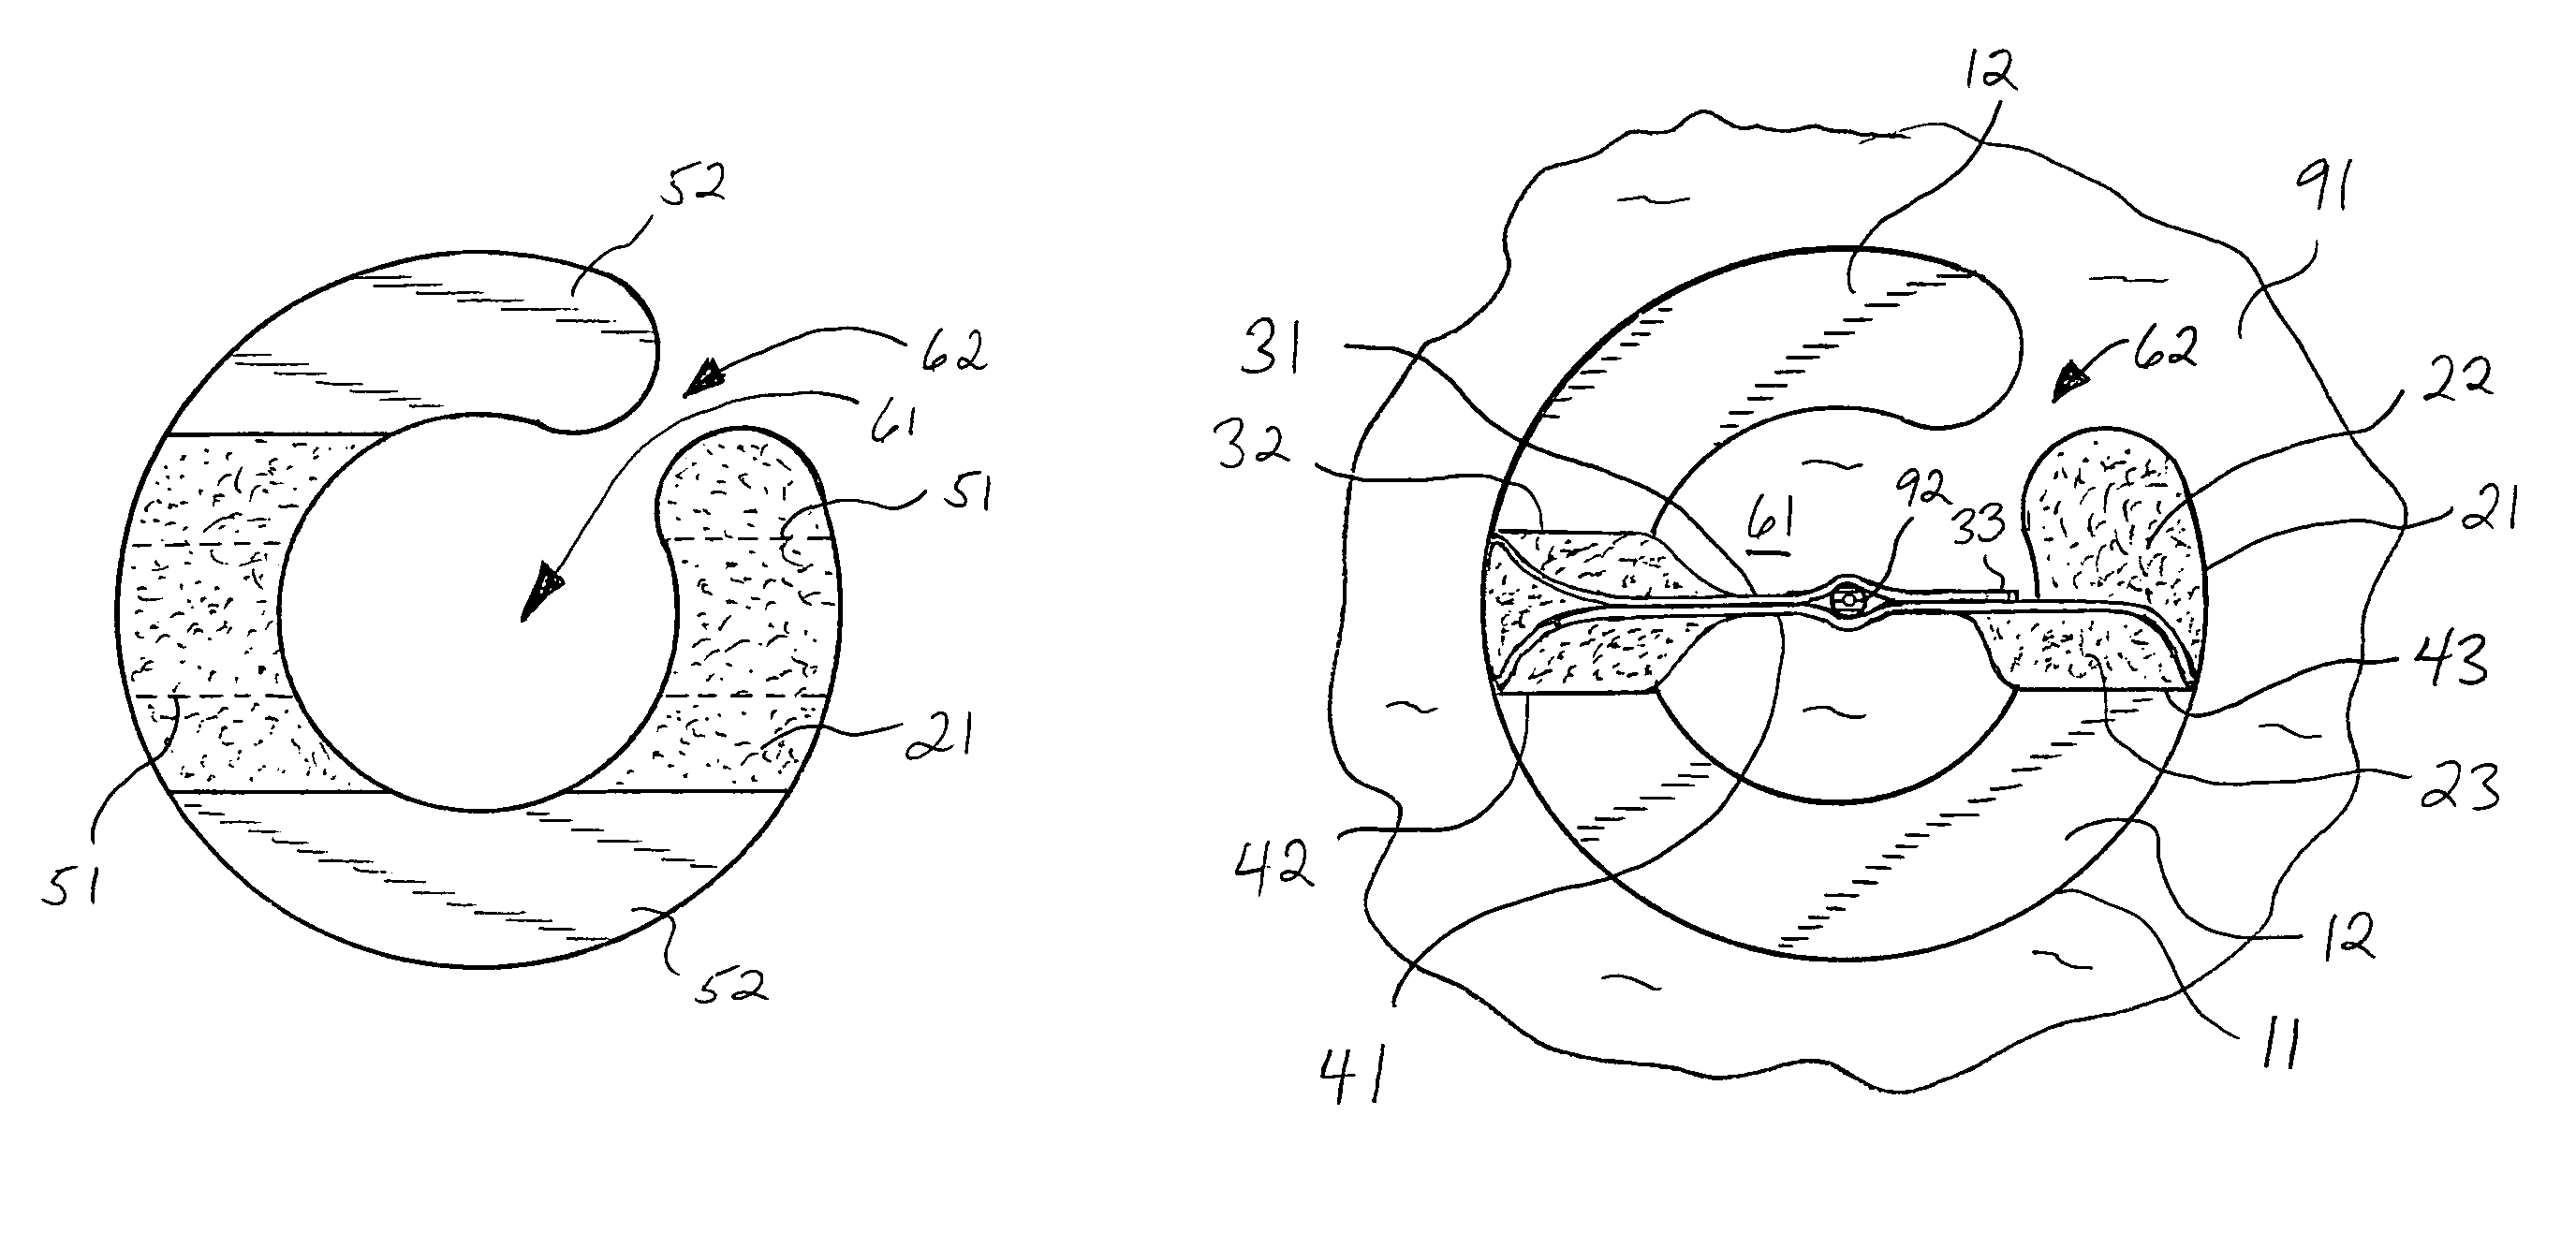 Slotted catheter securement device